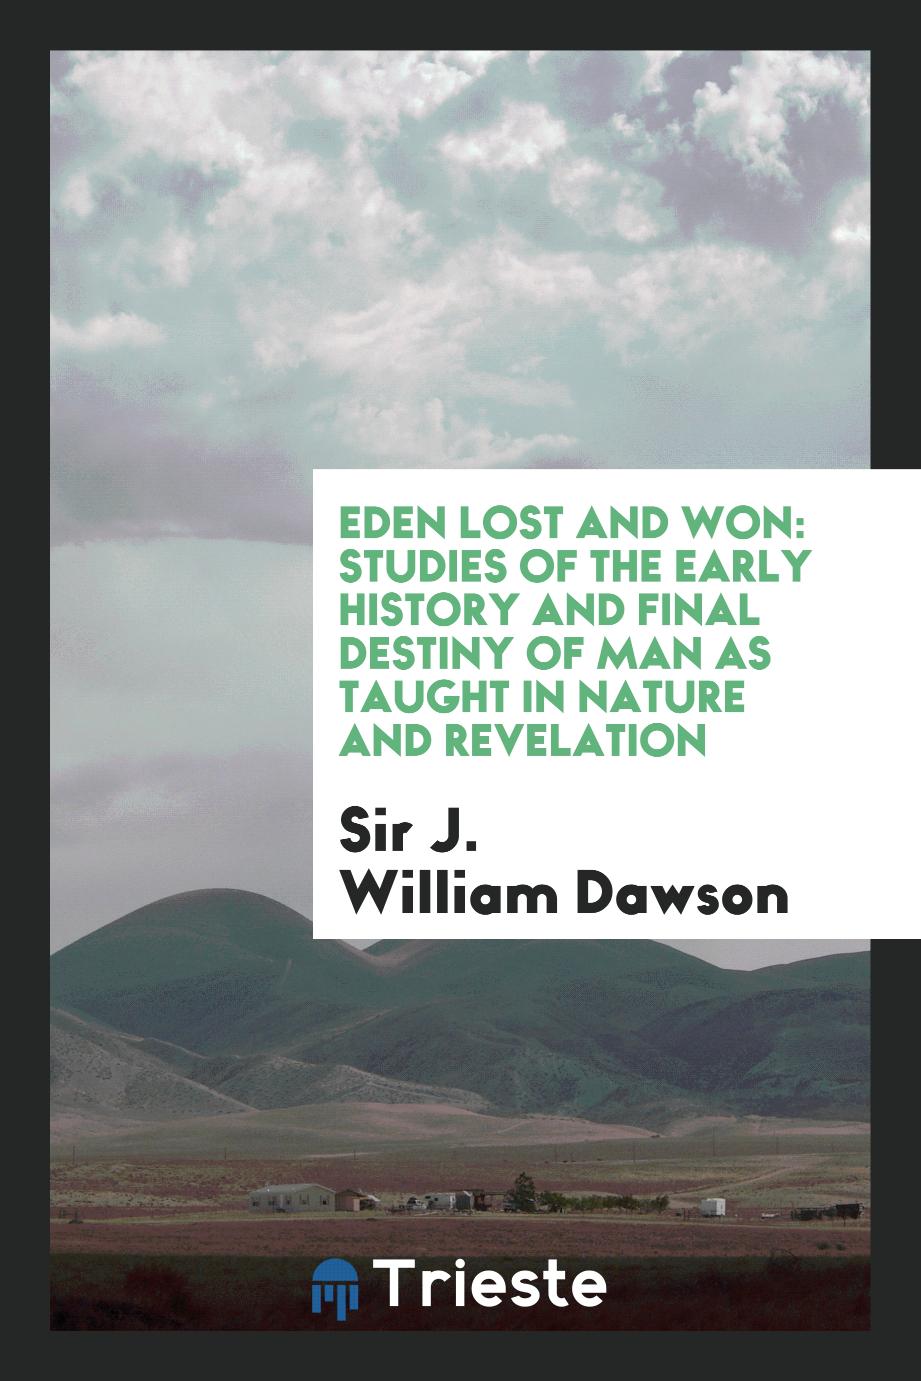 Eden lost and won: studies of the early history and final destiny of man as taught in nature and revelation